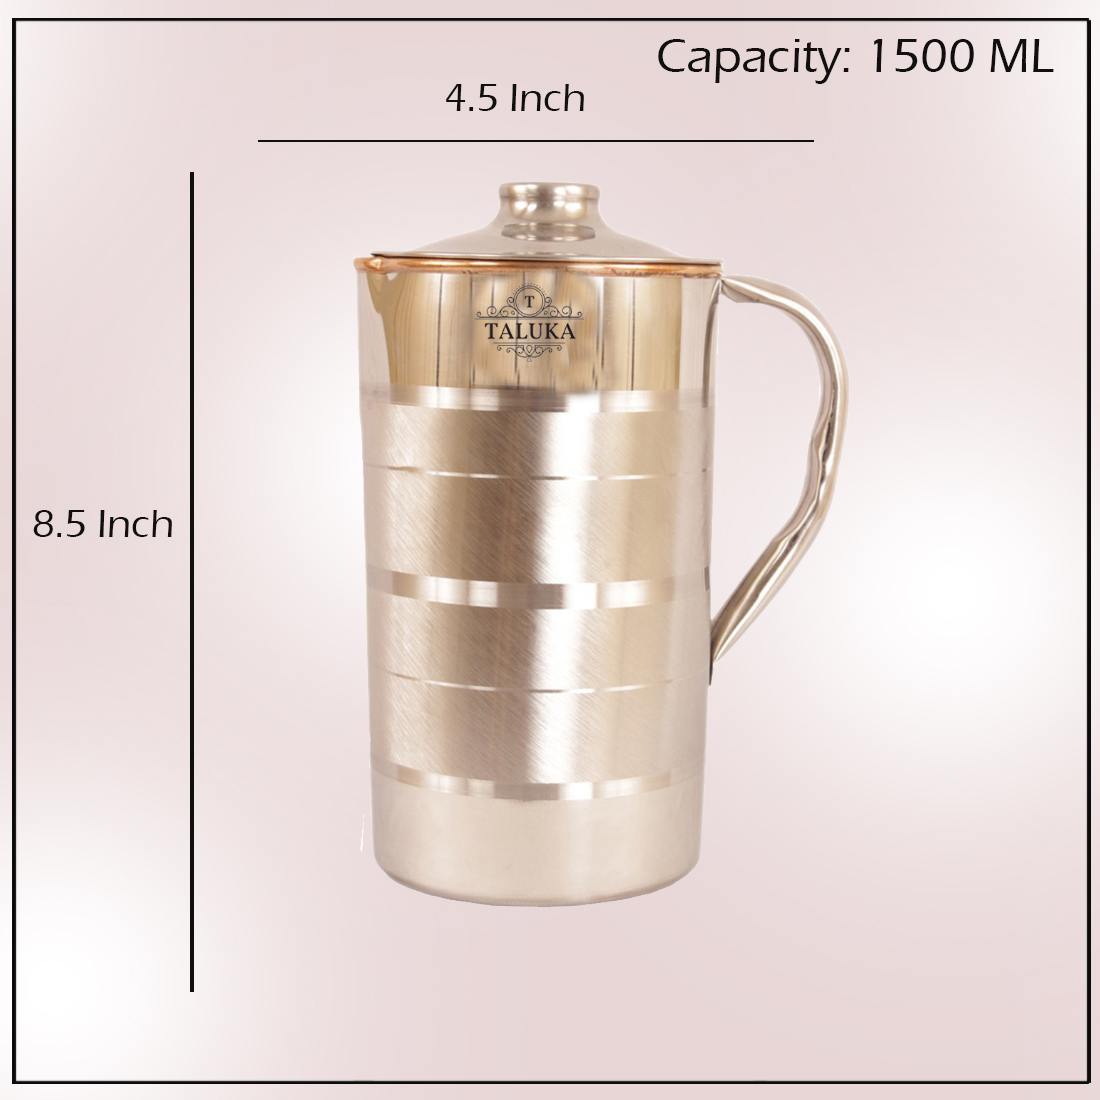 Copper Steel Jug Water Pitcher For Drinking Storage Capacity: 1500 ML